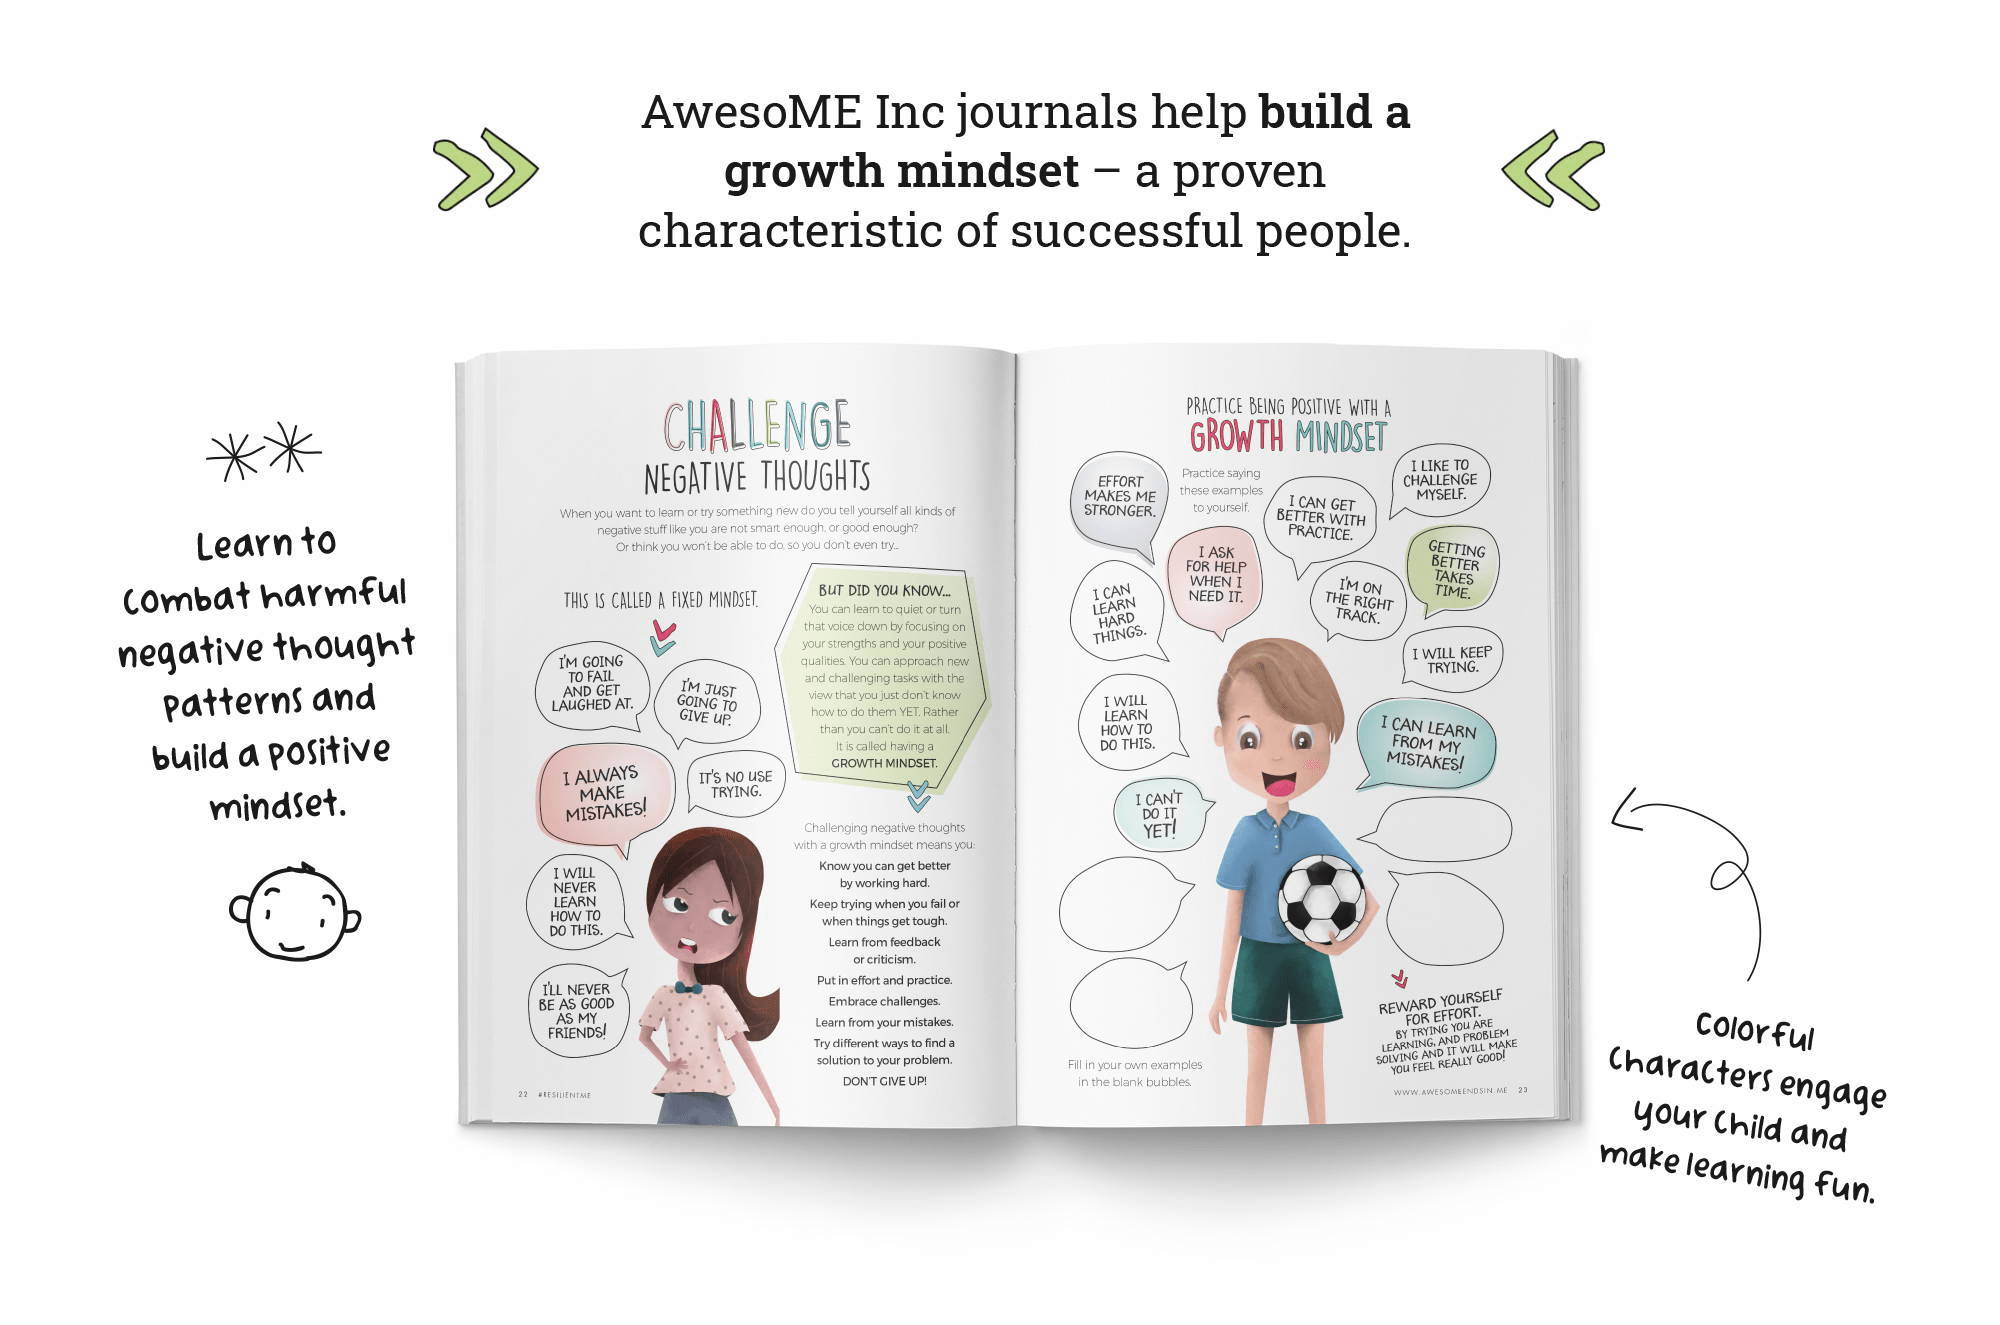 Awesome inc journals help build a growth mindset- a proven characteristic of successful people.